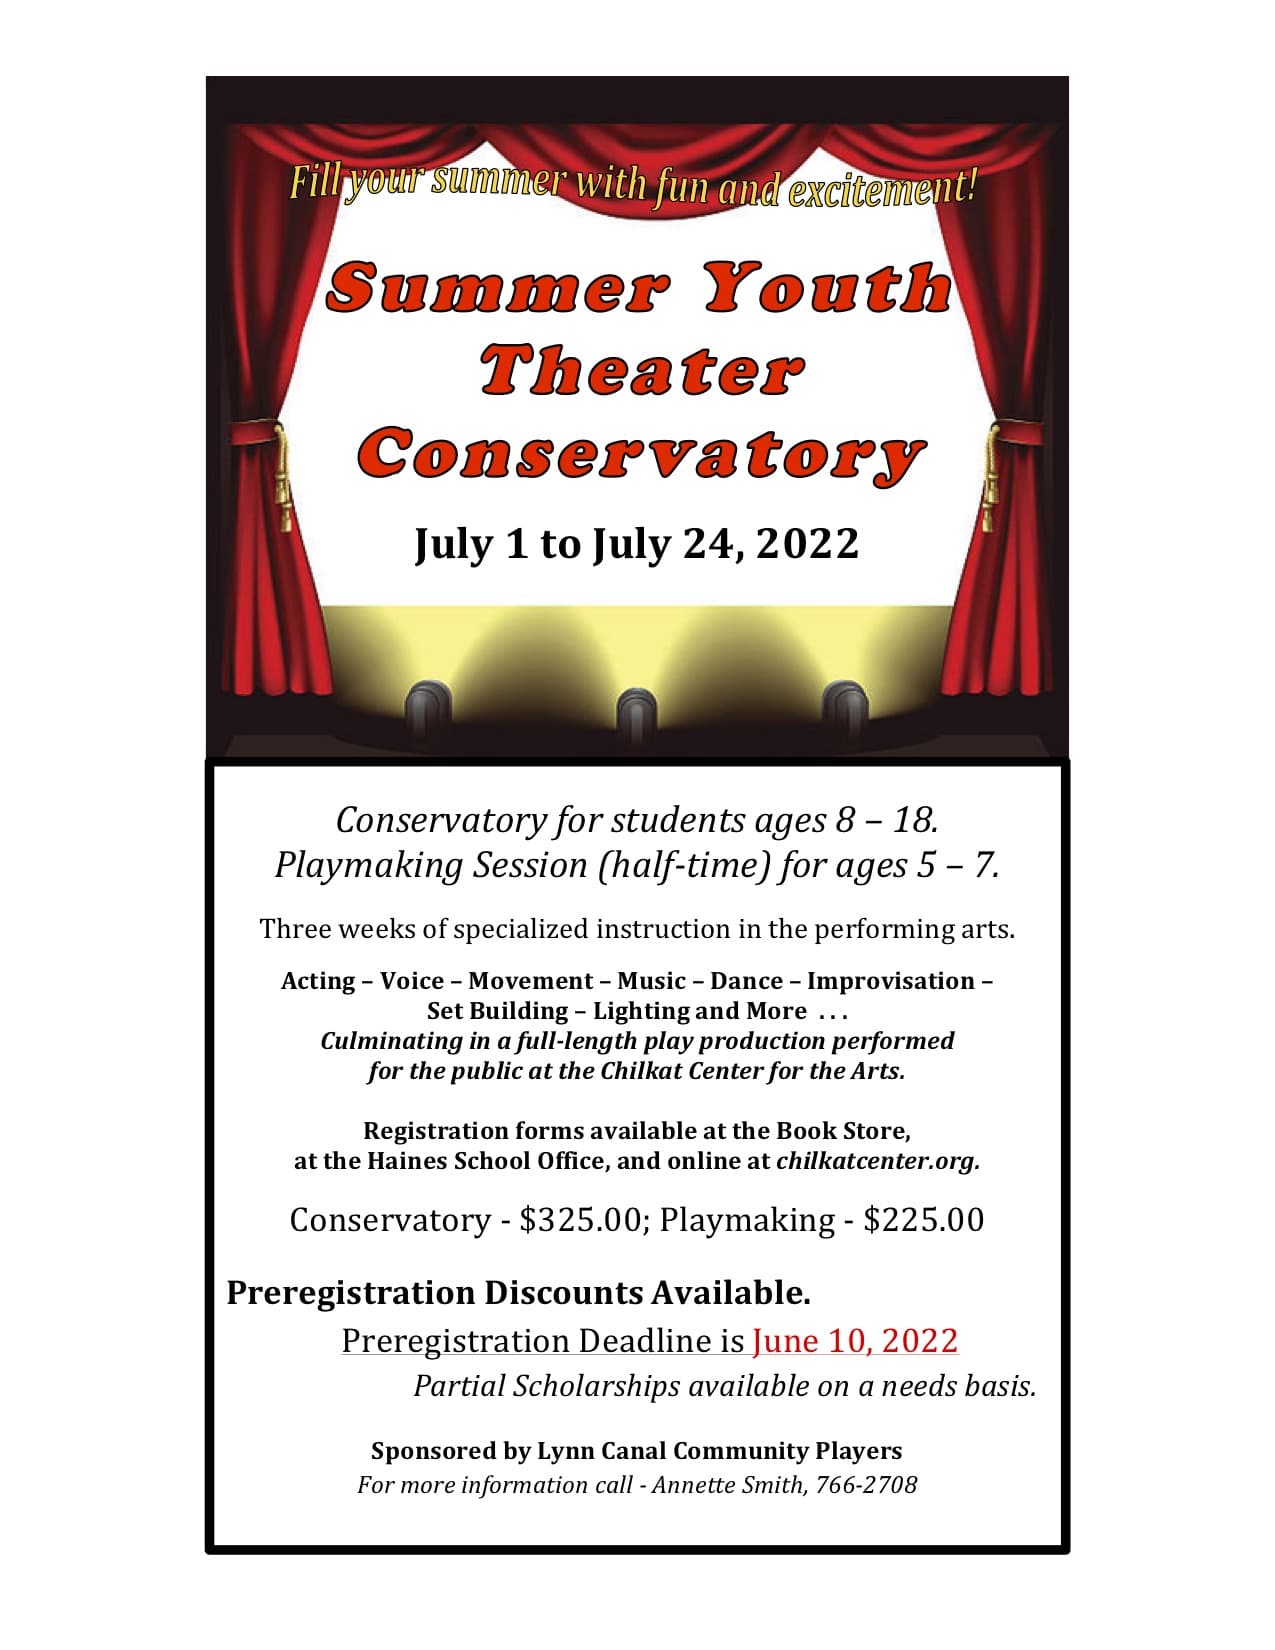 Summer Youth Theater Conservancy (click for registration link)